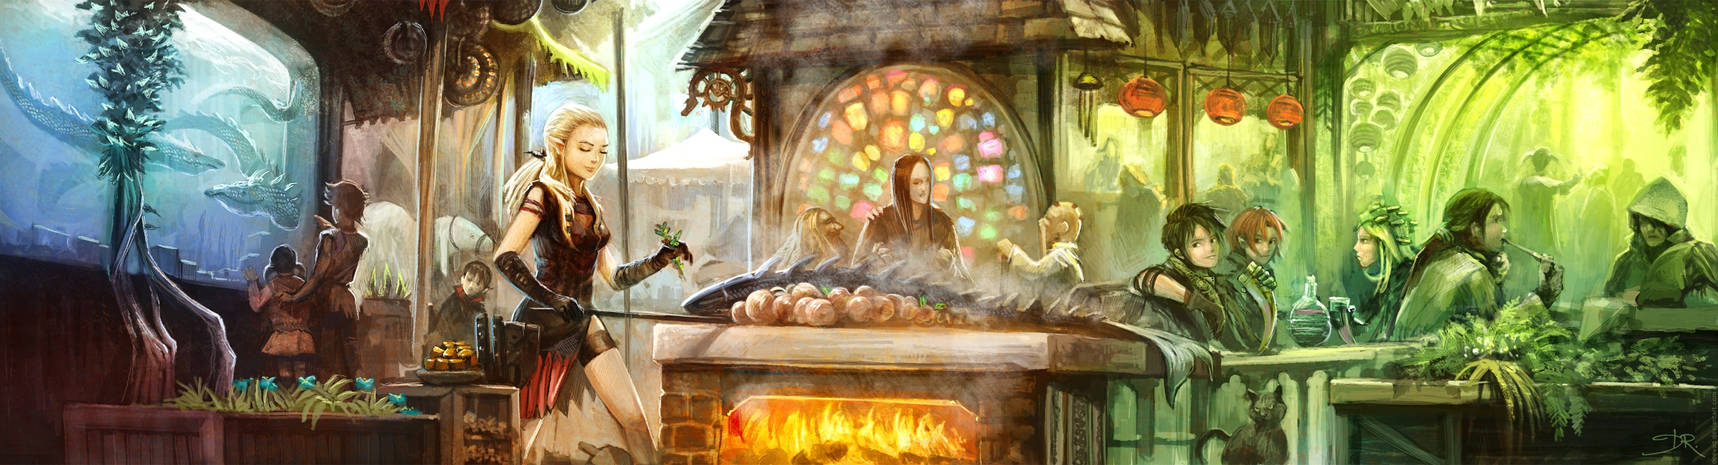 Water-Dragons cooking place